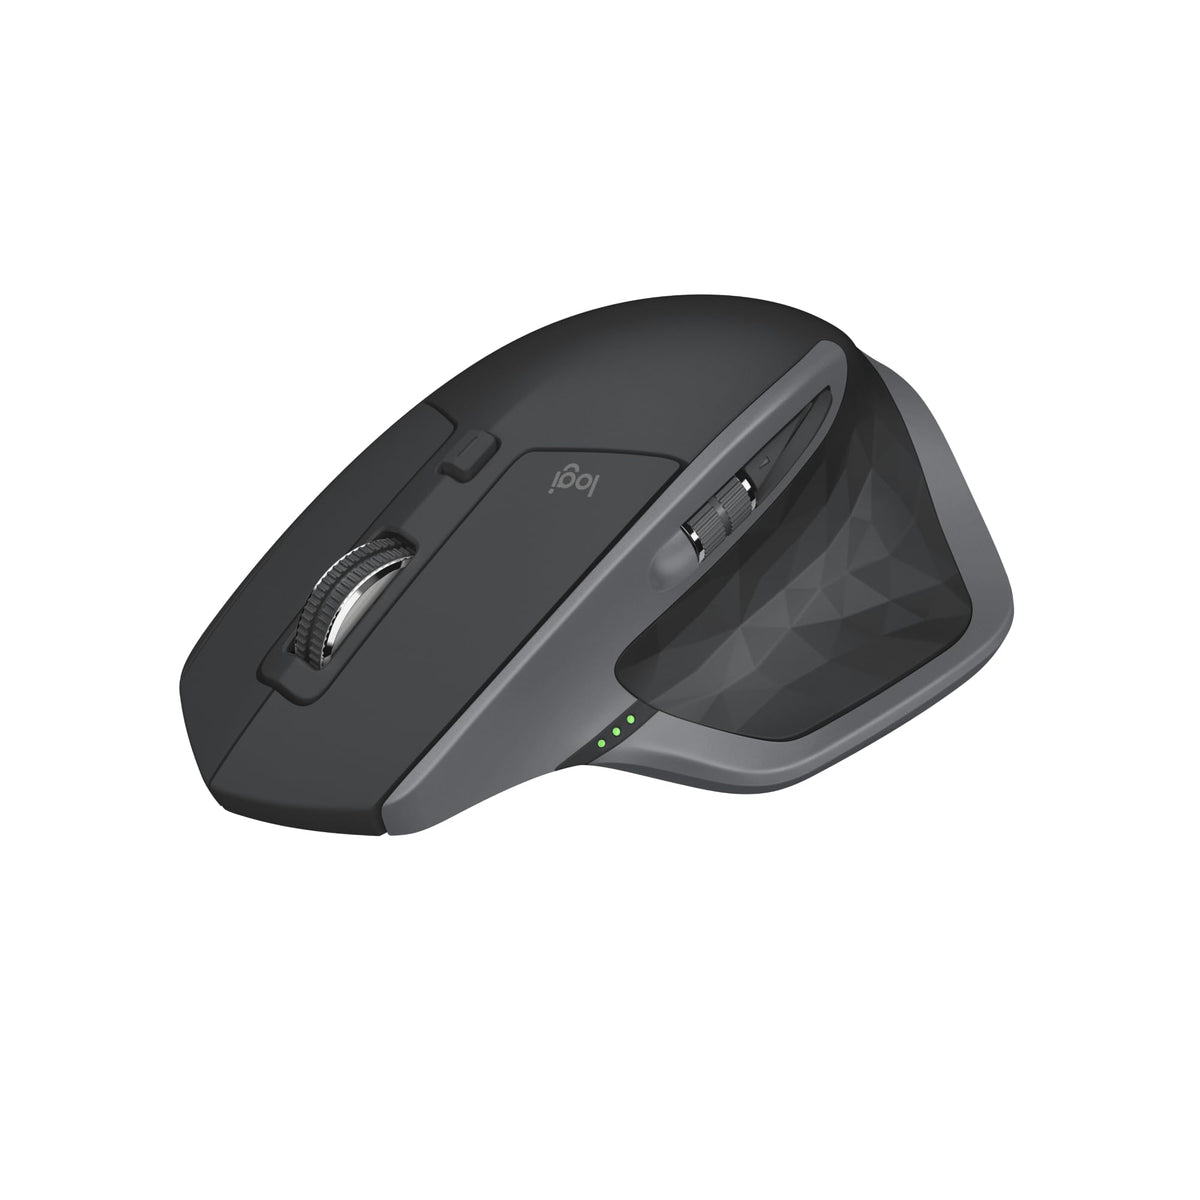 Logitech MX Master 2S Bluetooth Edition Wireless Mouse - Use on Any Surface, Hyper-Fast Scrolling, Ergonomic, Rechargeable, Control Up to 3 Apple Mac and Windows Computers - Graphite